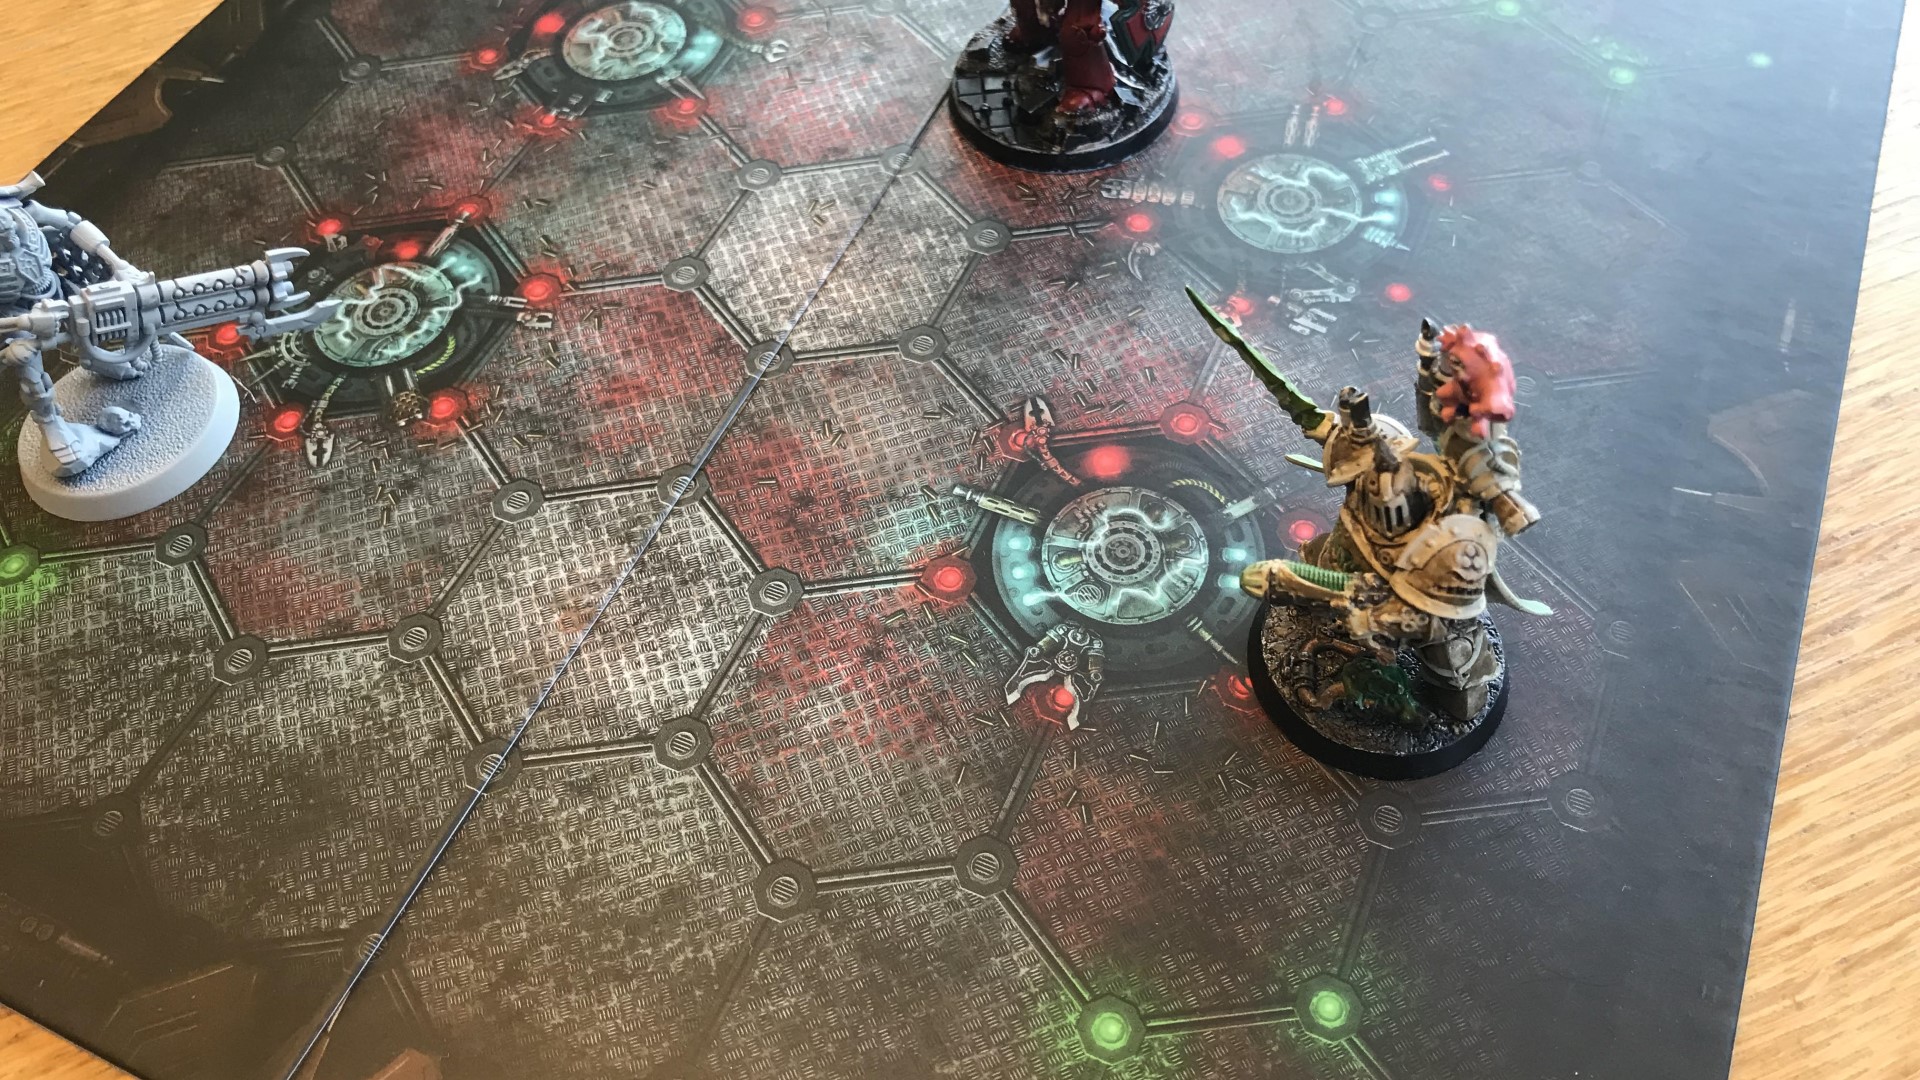 Warhammer 40k combat arena clash of champions board, with three champions fighting.